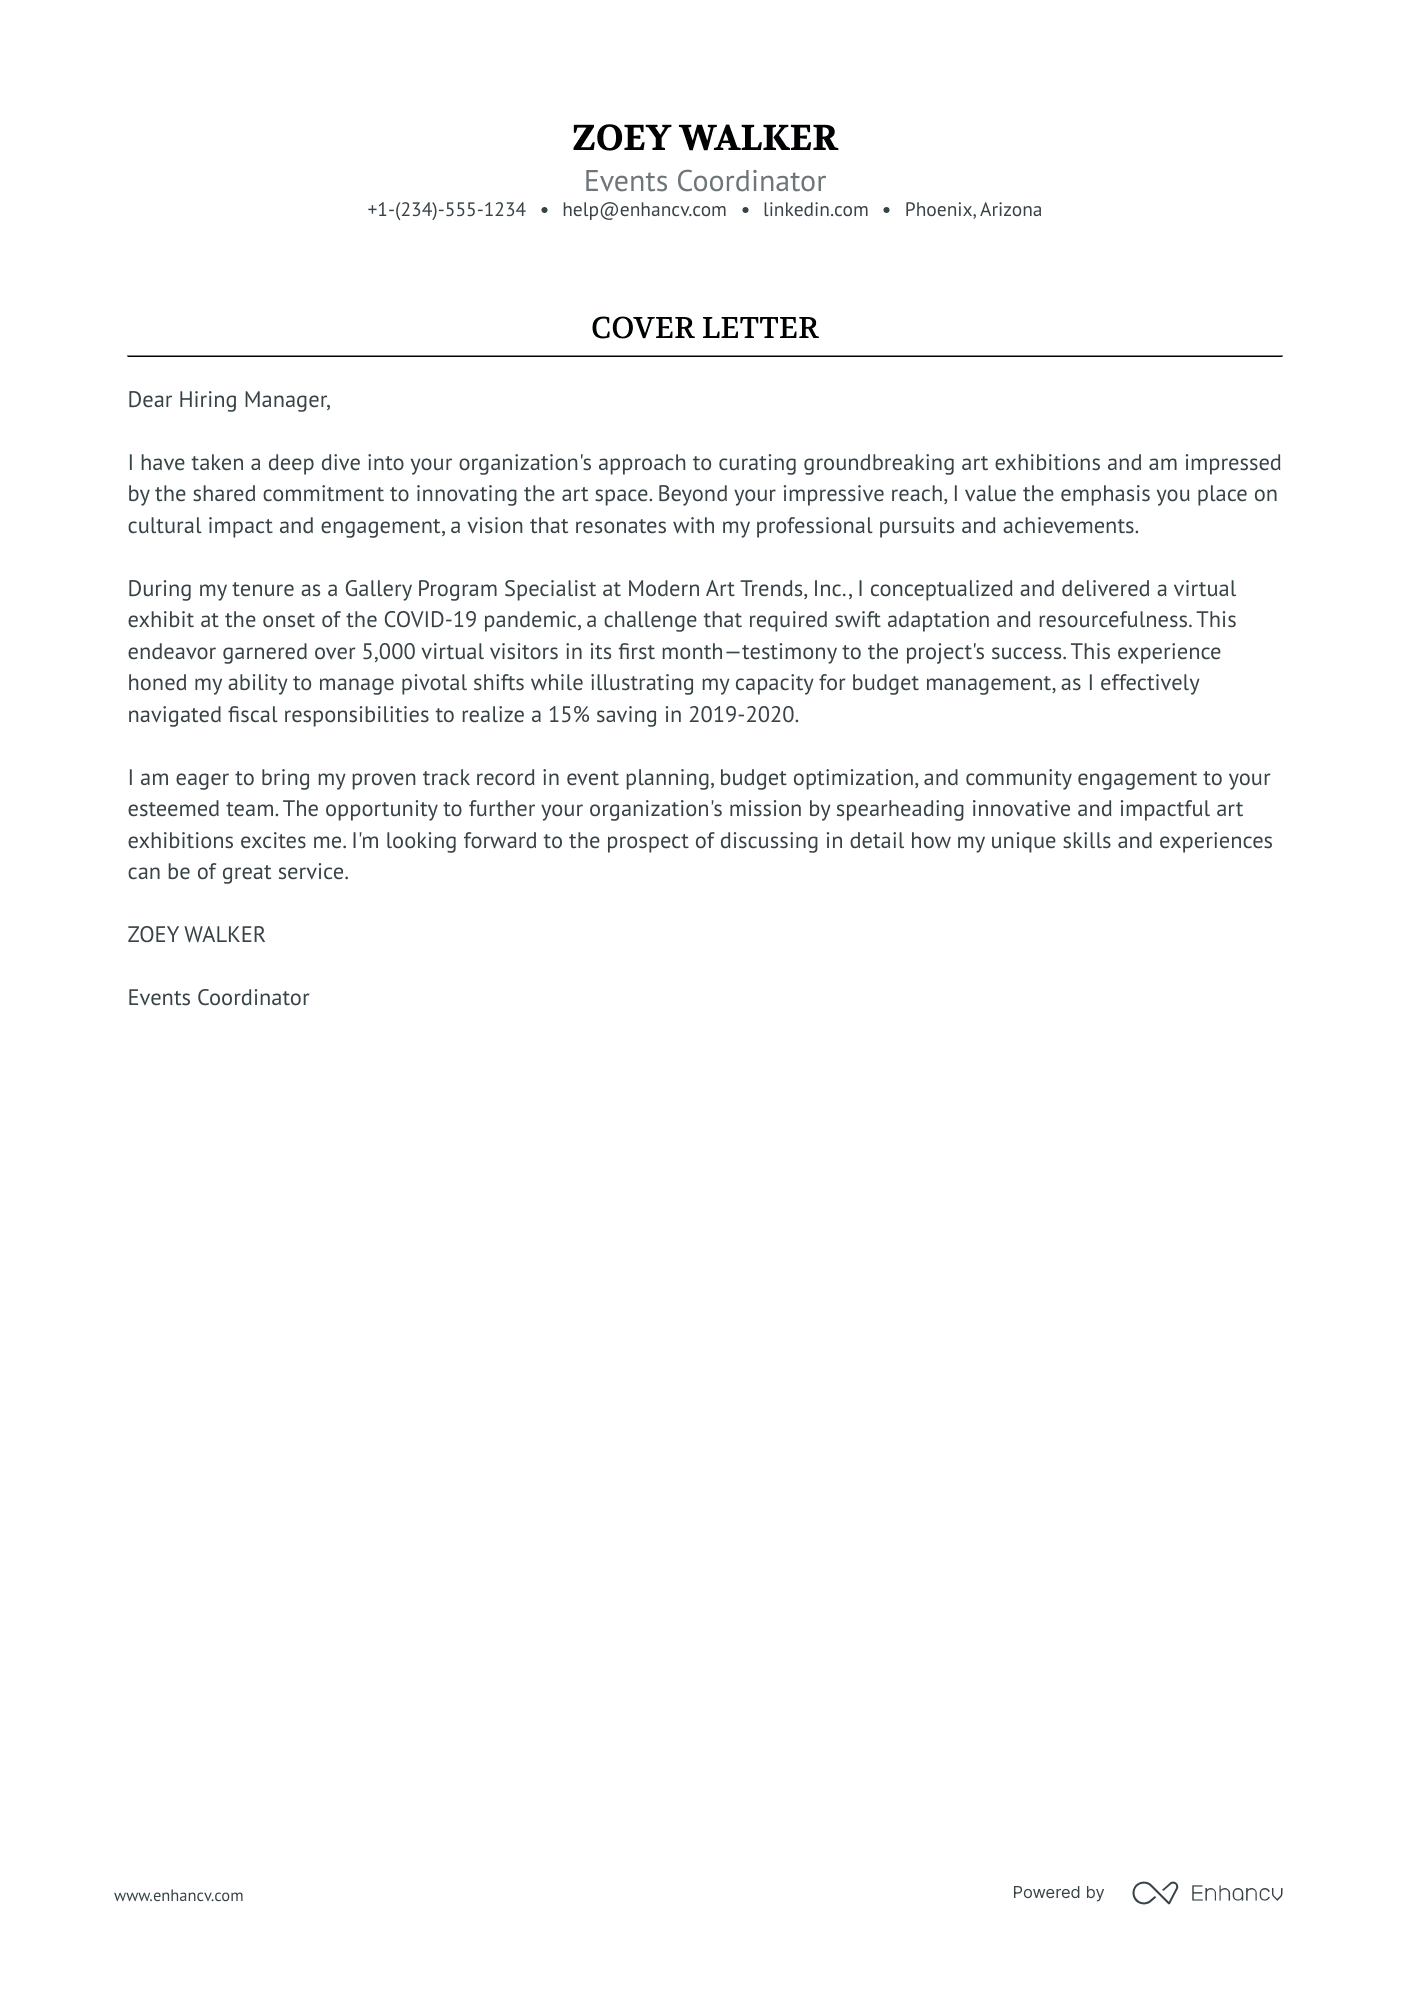 Gallery Director cover letter